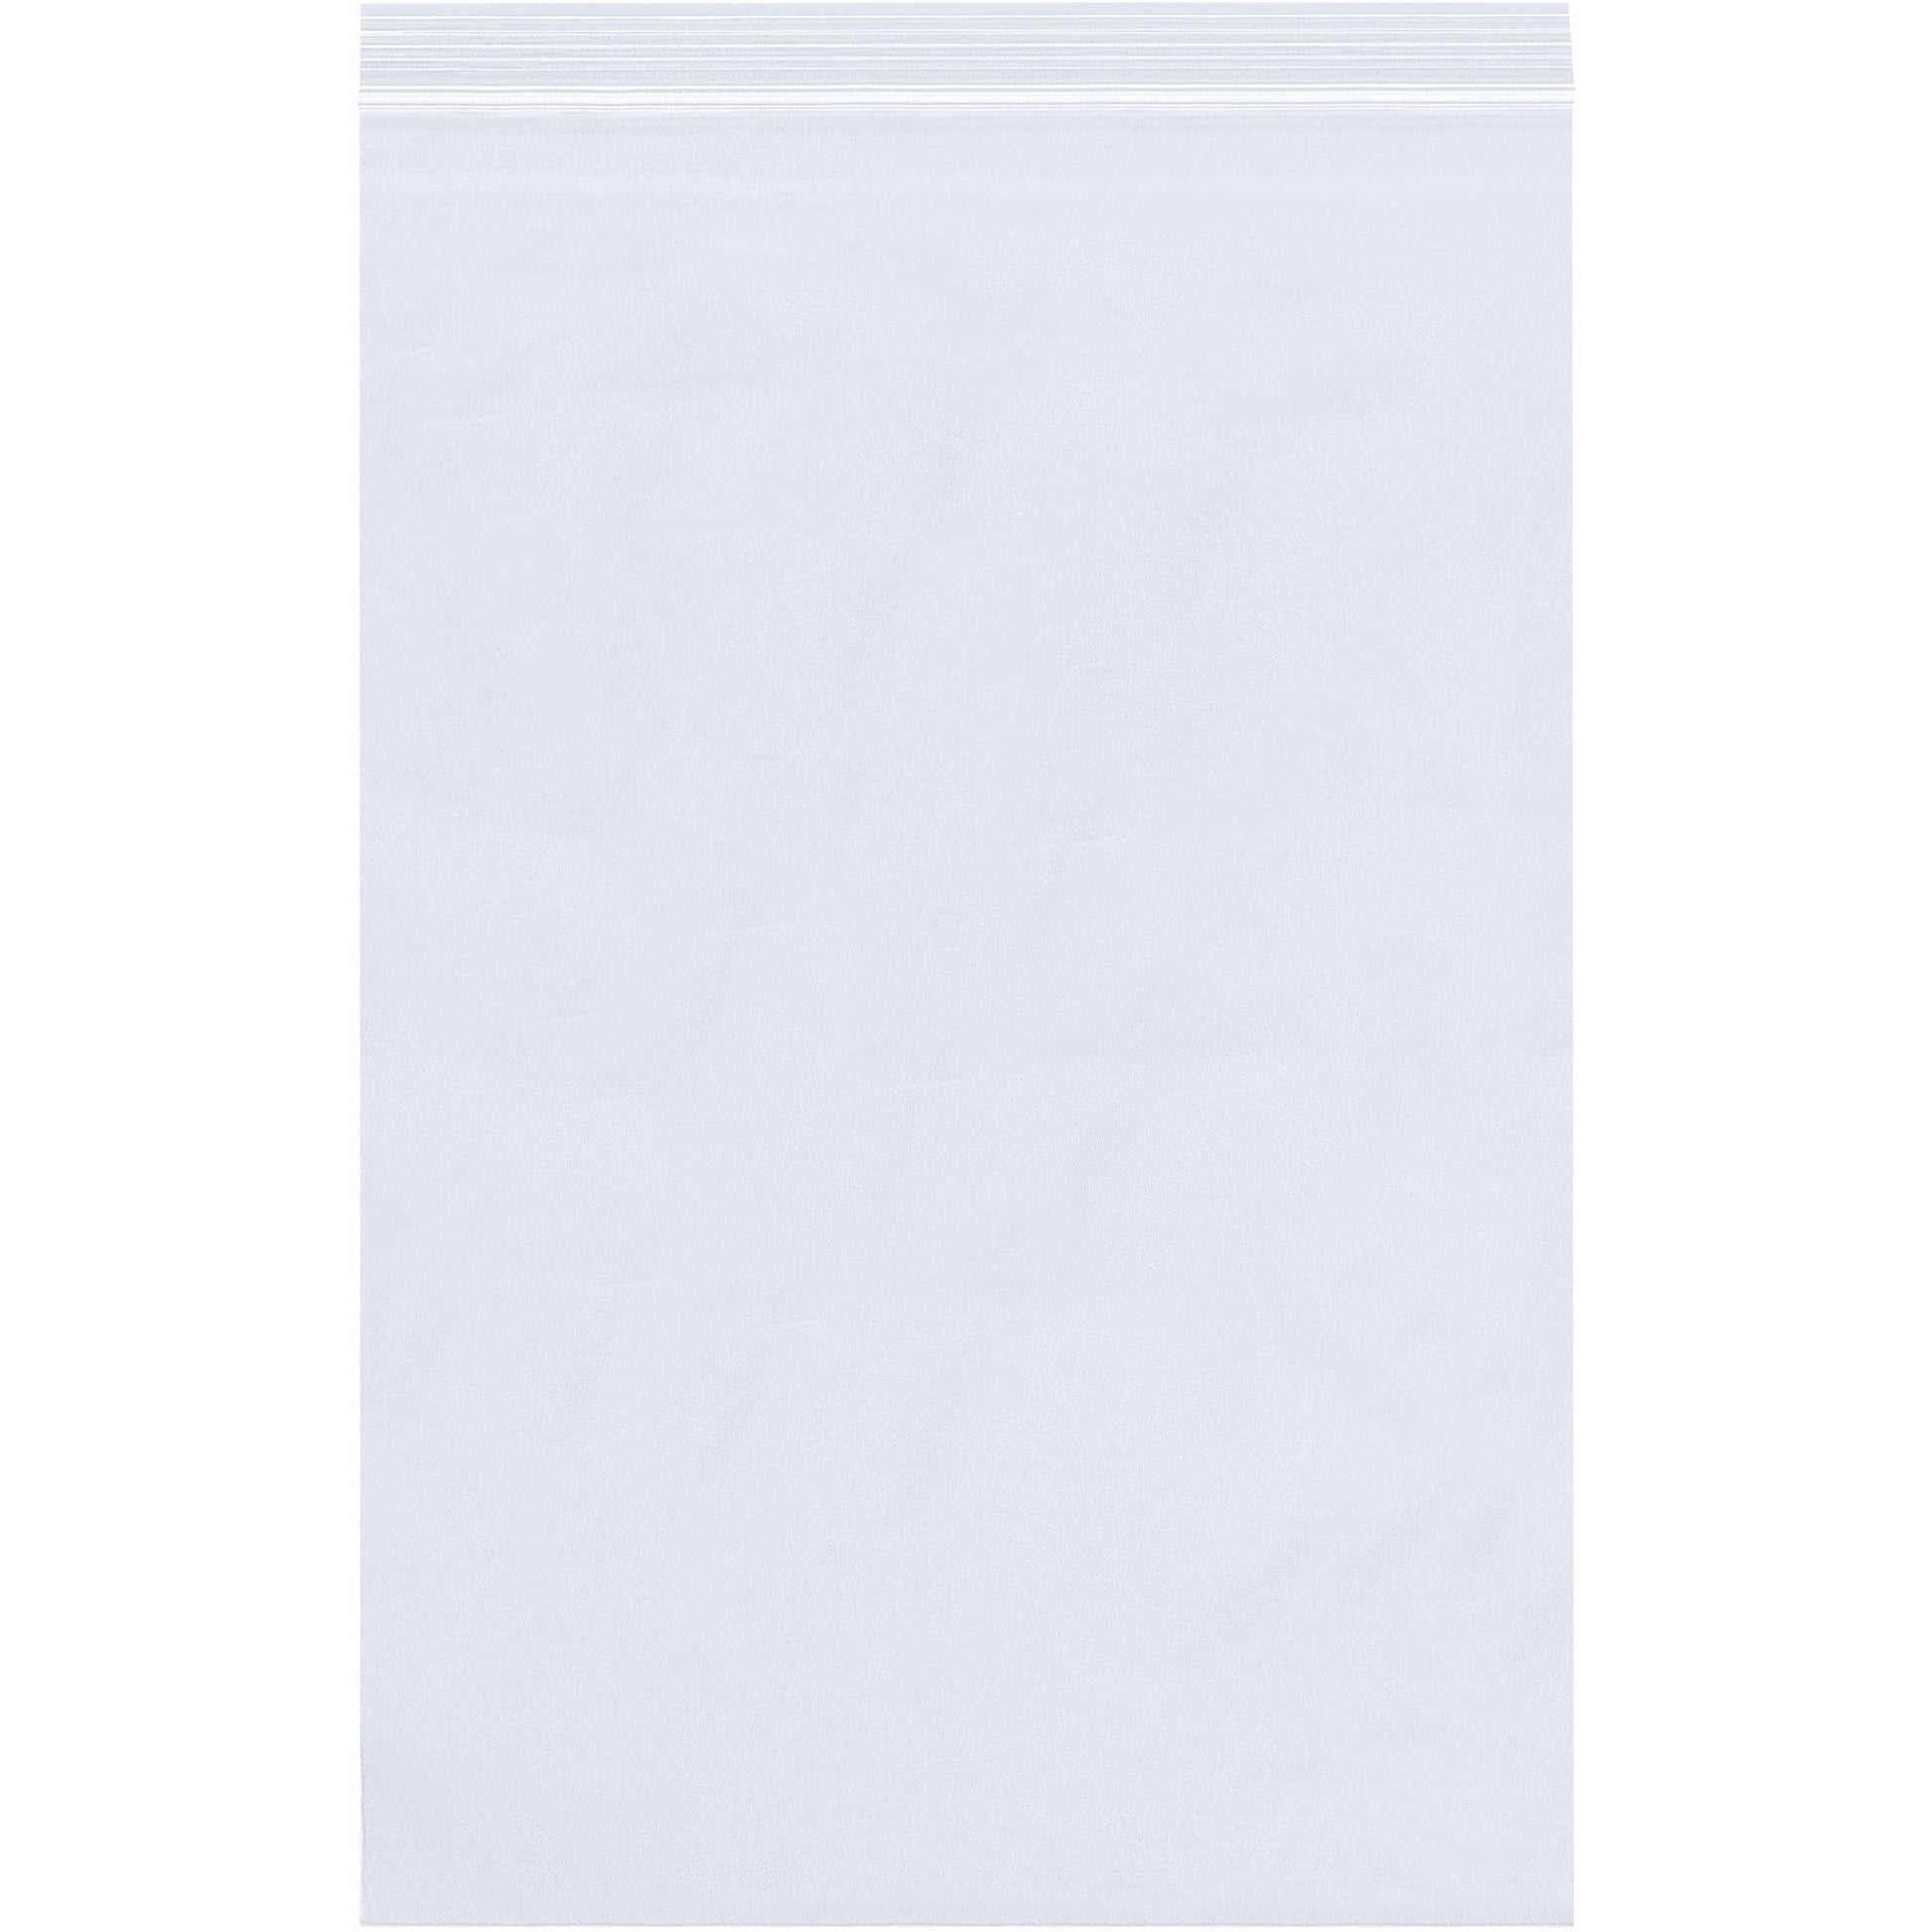 7 x 8" - 6 Mil Reclosable Poly Bags - PB3874